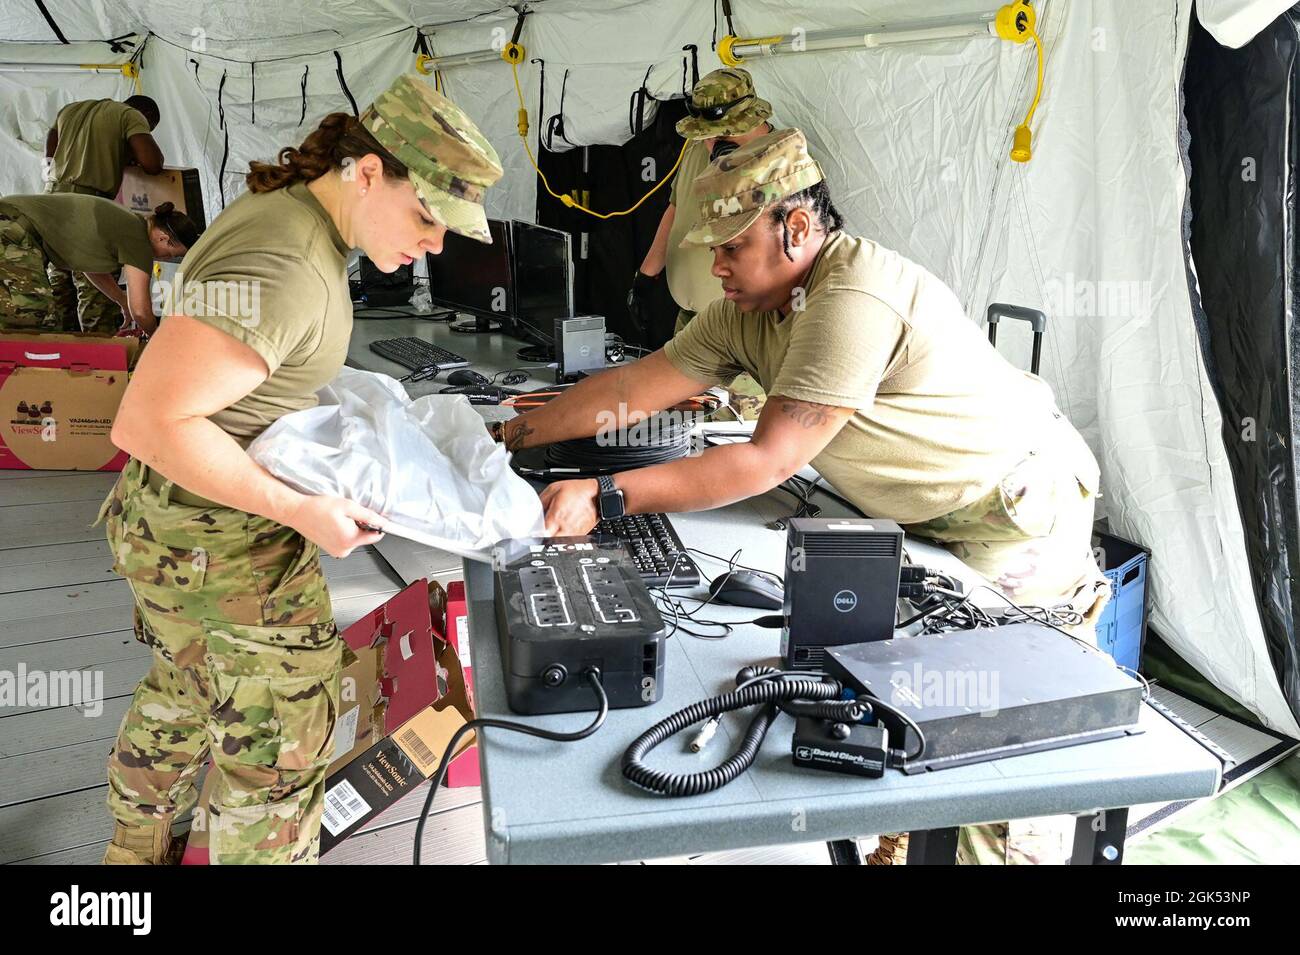 U.S. Air Force Airman 1st Class Emily Kerwin, Cybersureity and Staff Sgt. De’Lisha Brooks, Client Systems Technician from the 117th Air Control Squadron, Georgia Air National Guard setup computer systems for a mobile command and control facility during their two weeks of annual field training at Fernandino Beach, Florida, August 3, 2021. The 117th Air Control Squadron provides theater command with air battle management, radar surveillance, air space control, and long haul communication capabilities to plan and execute combined air operations; air superiority and air strike ground attack operat Stock Photo